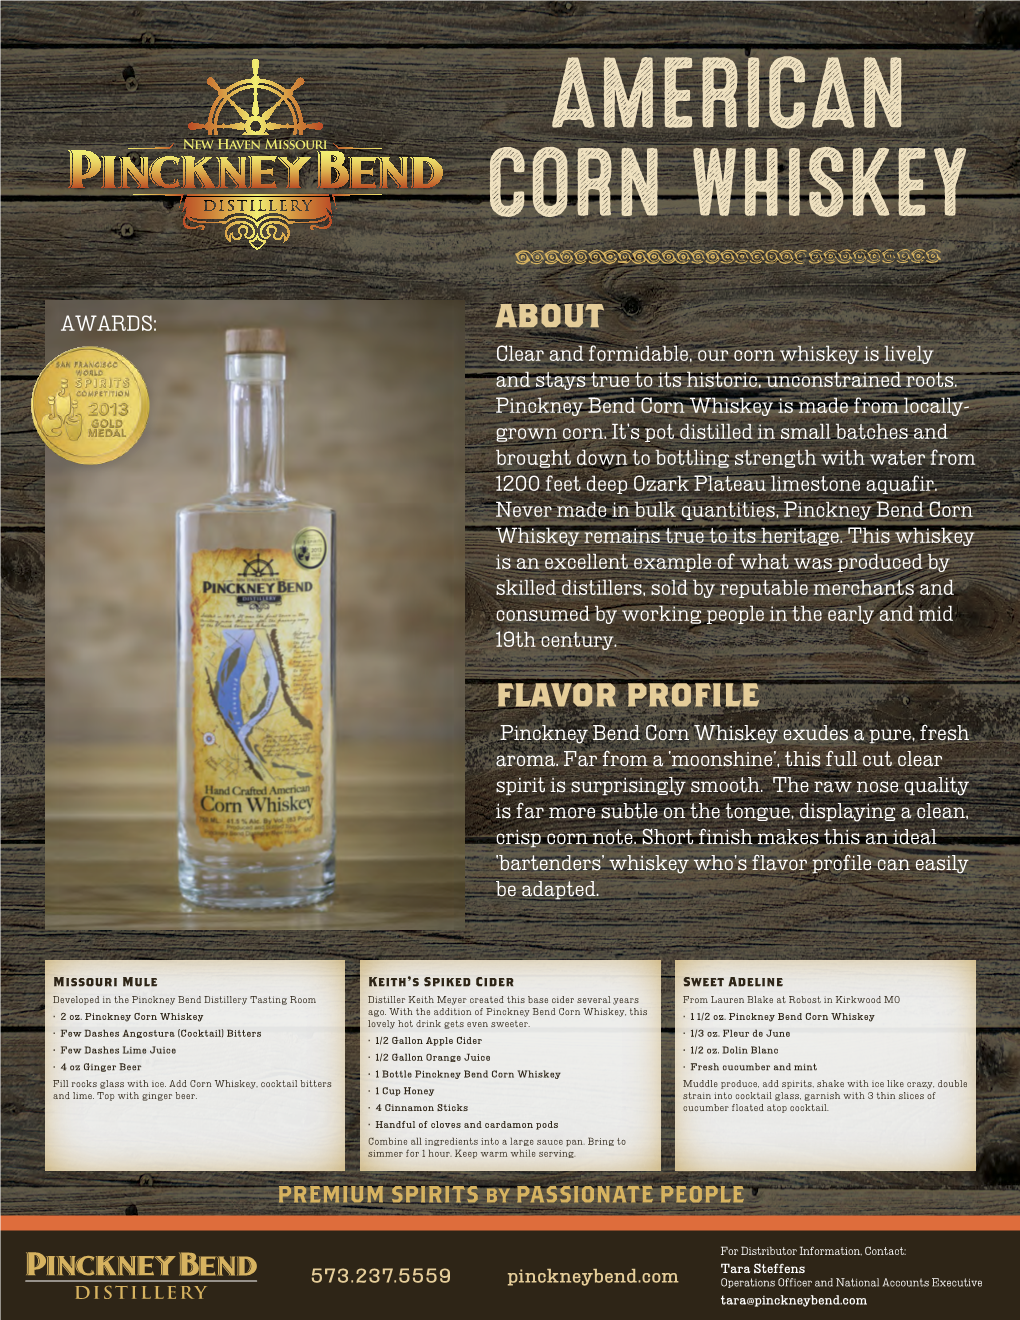 AMERICAN CORN WHISKEY Ð AWARDS: ABOUT Clear and Formidable, Our Corn Whiskey Is Lively and Stays True to Its Historic, Unconstrained Roots